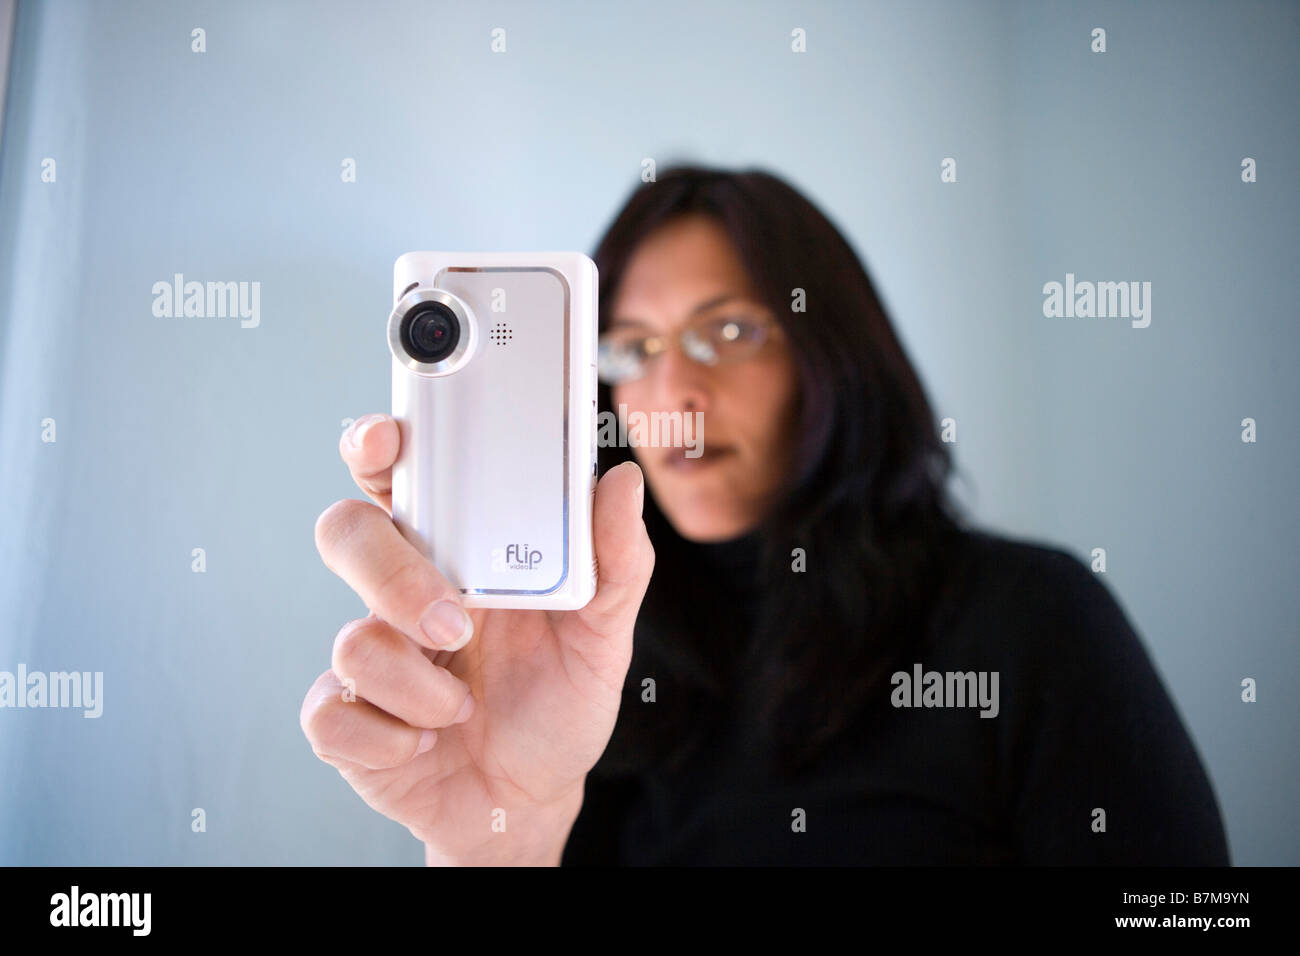 woman in mid thirties video taping using a small flip video camera Stock Photo